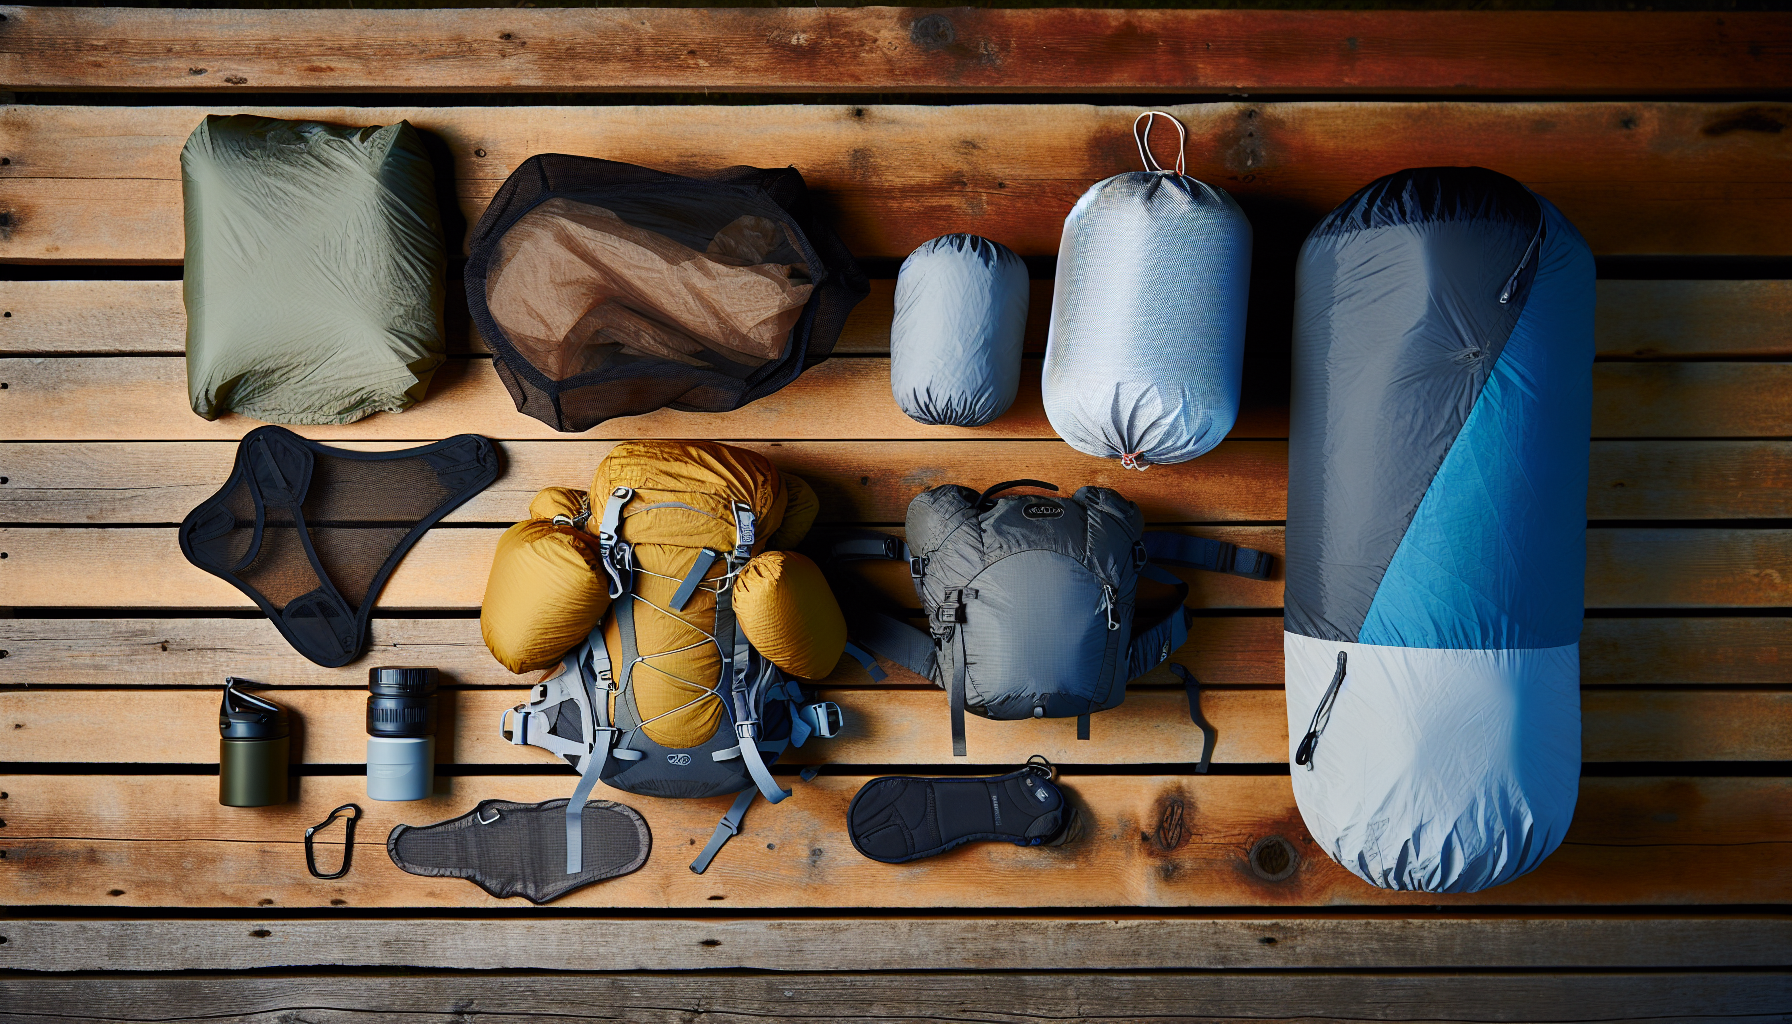 Top Picks: What Are the Must Have Gear Essentials for Ultralight Backpacking